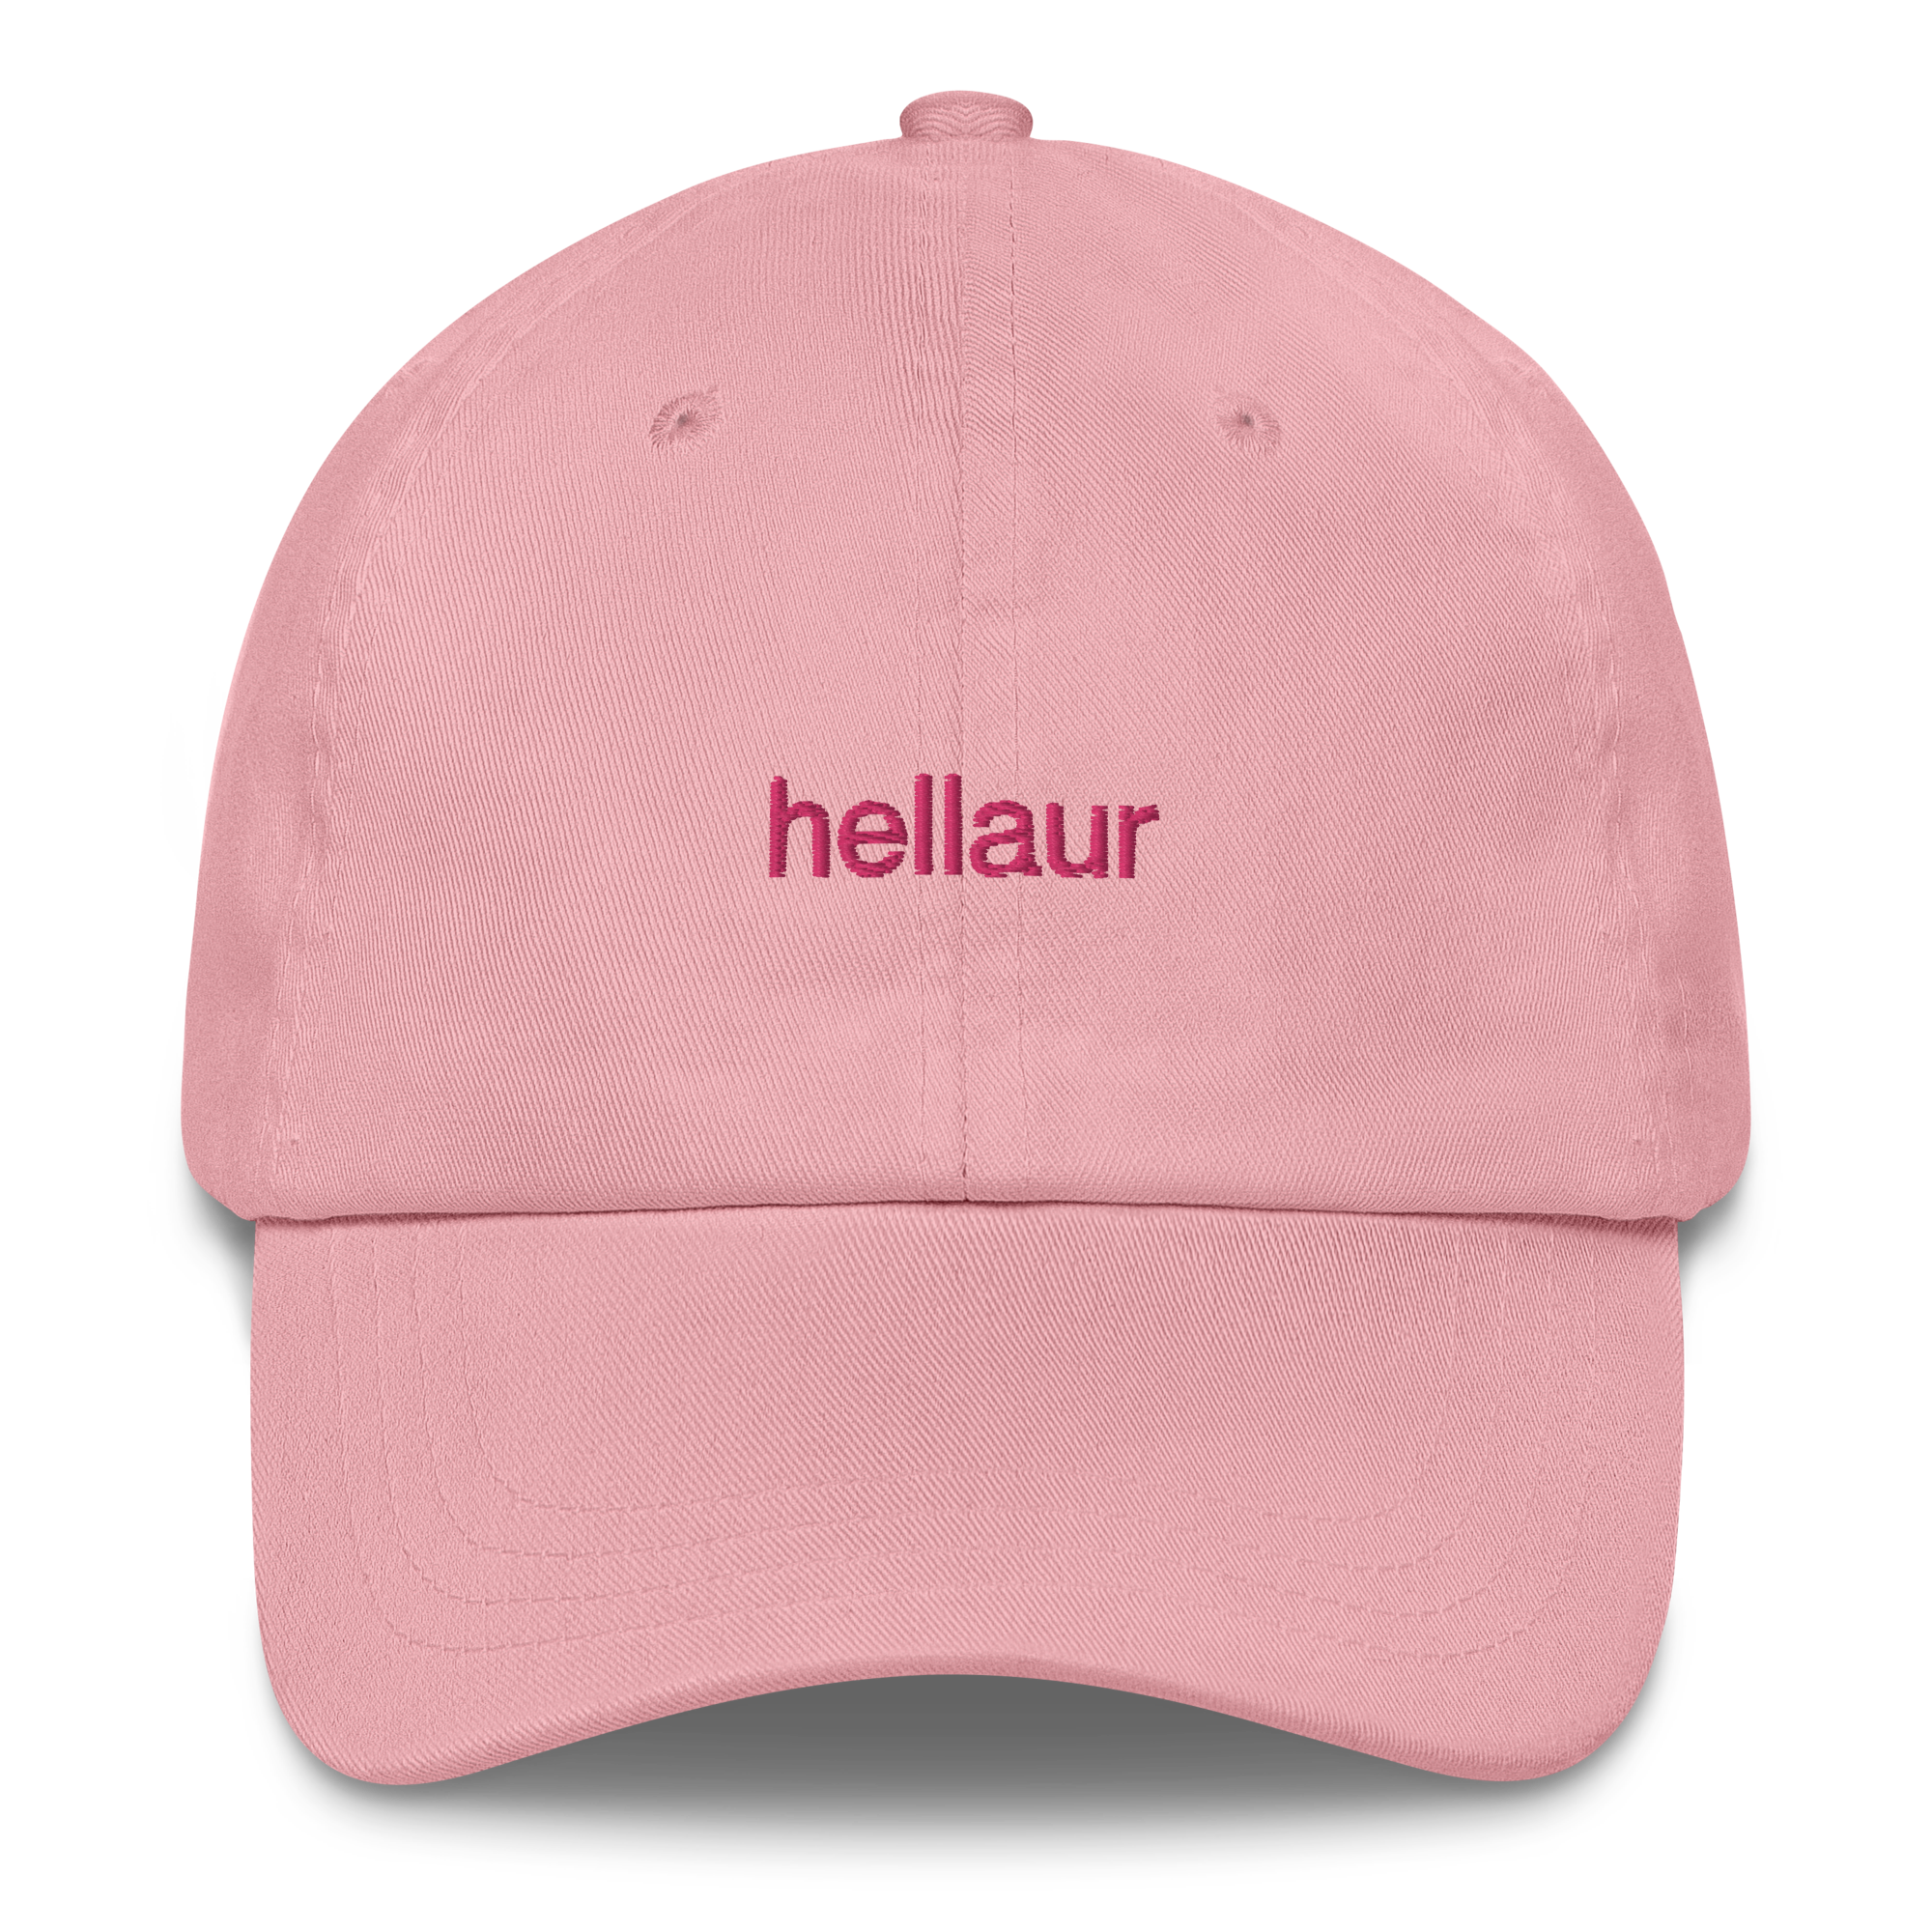 classic-dad-hat-pink-front-667eec2f0fa97.png